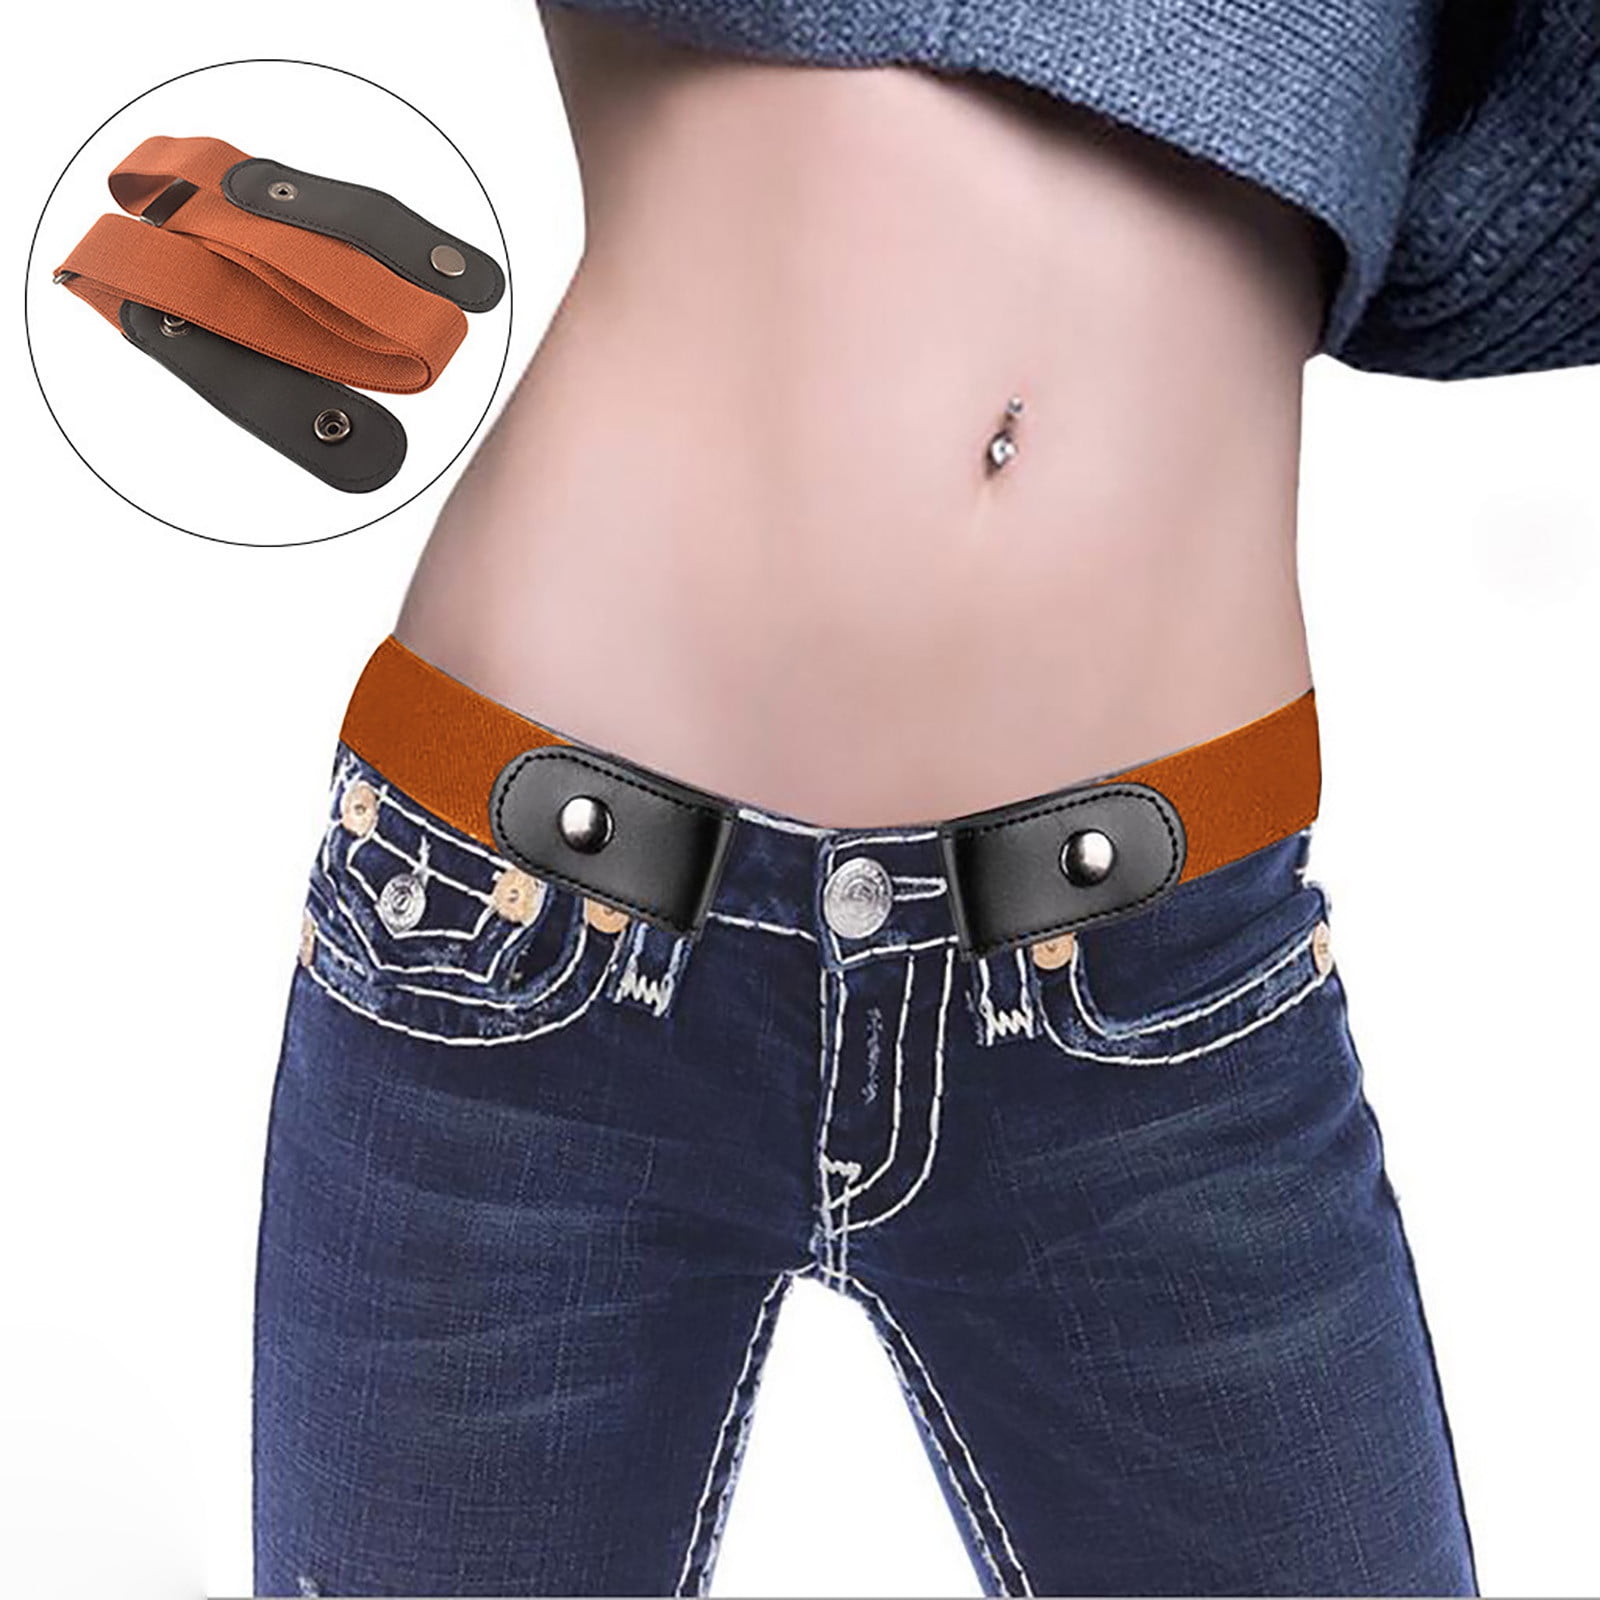 Buckle Waistband, CBGELRT with Invisible Women Belts Web Comfortable Pants Men Stretch Red Belts Elastic for and for Jeans Flat Strap